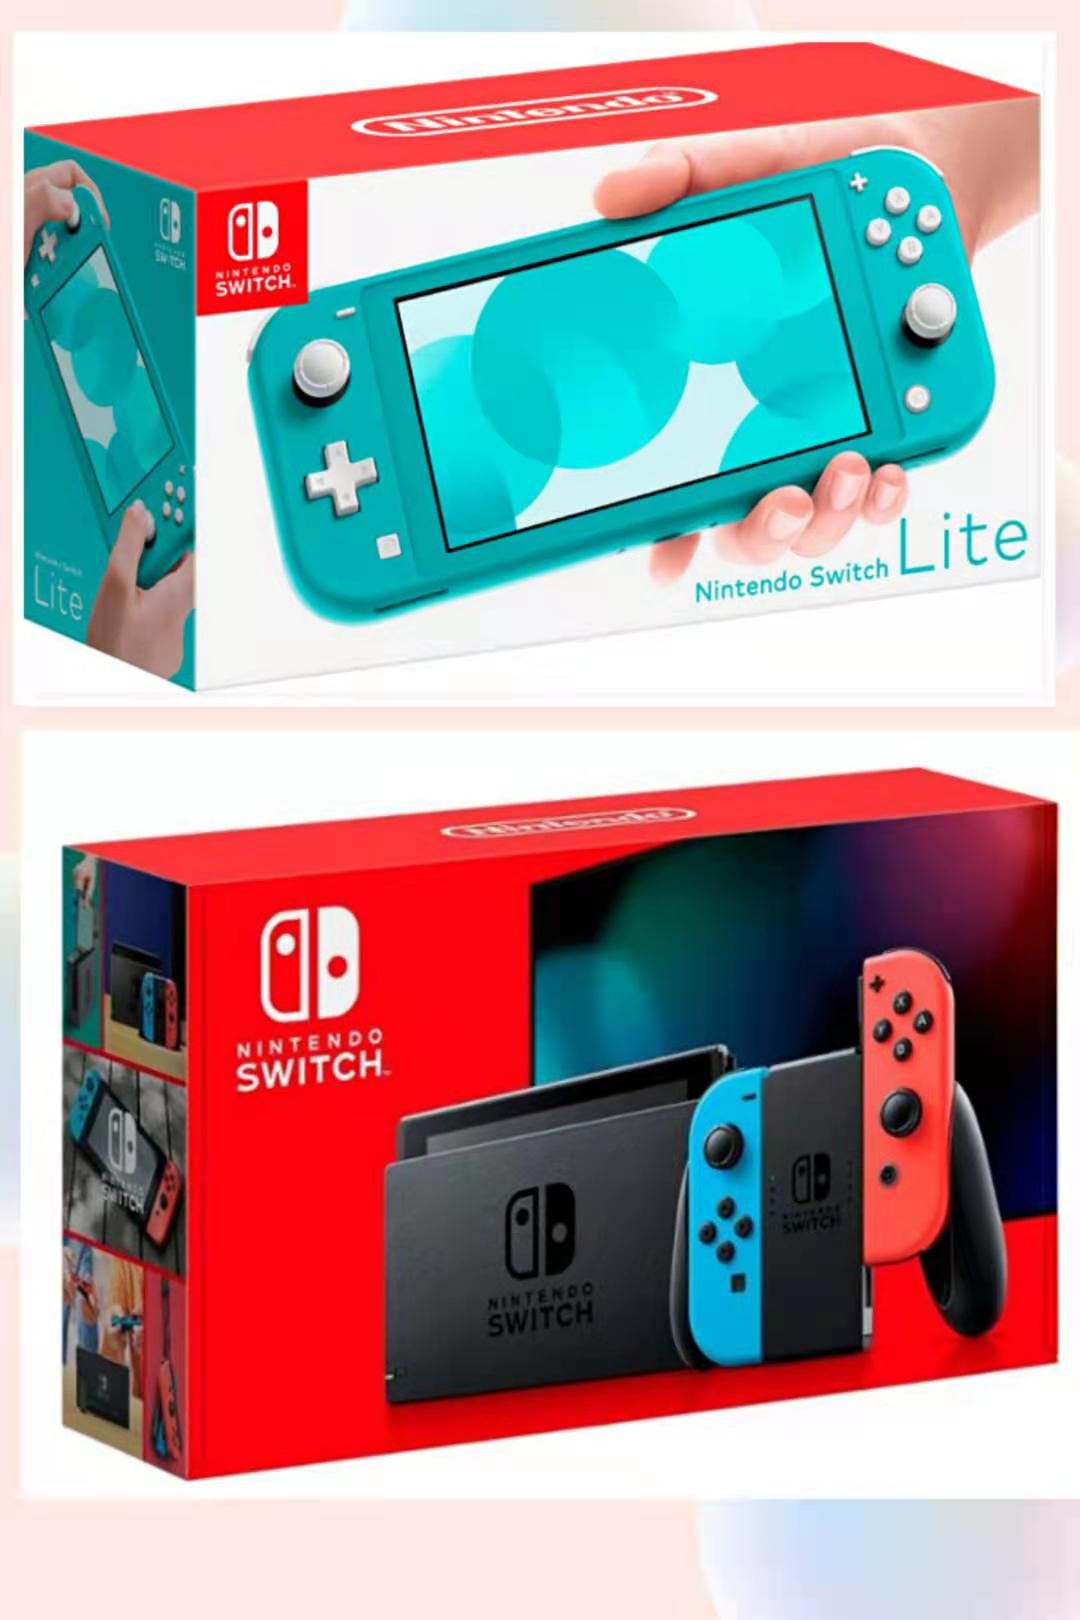 Nintendo Switch vs. Lite: 9 Differences You Should Know Before You Buy!